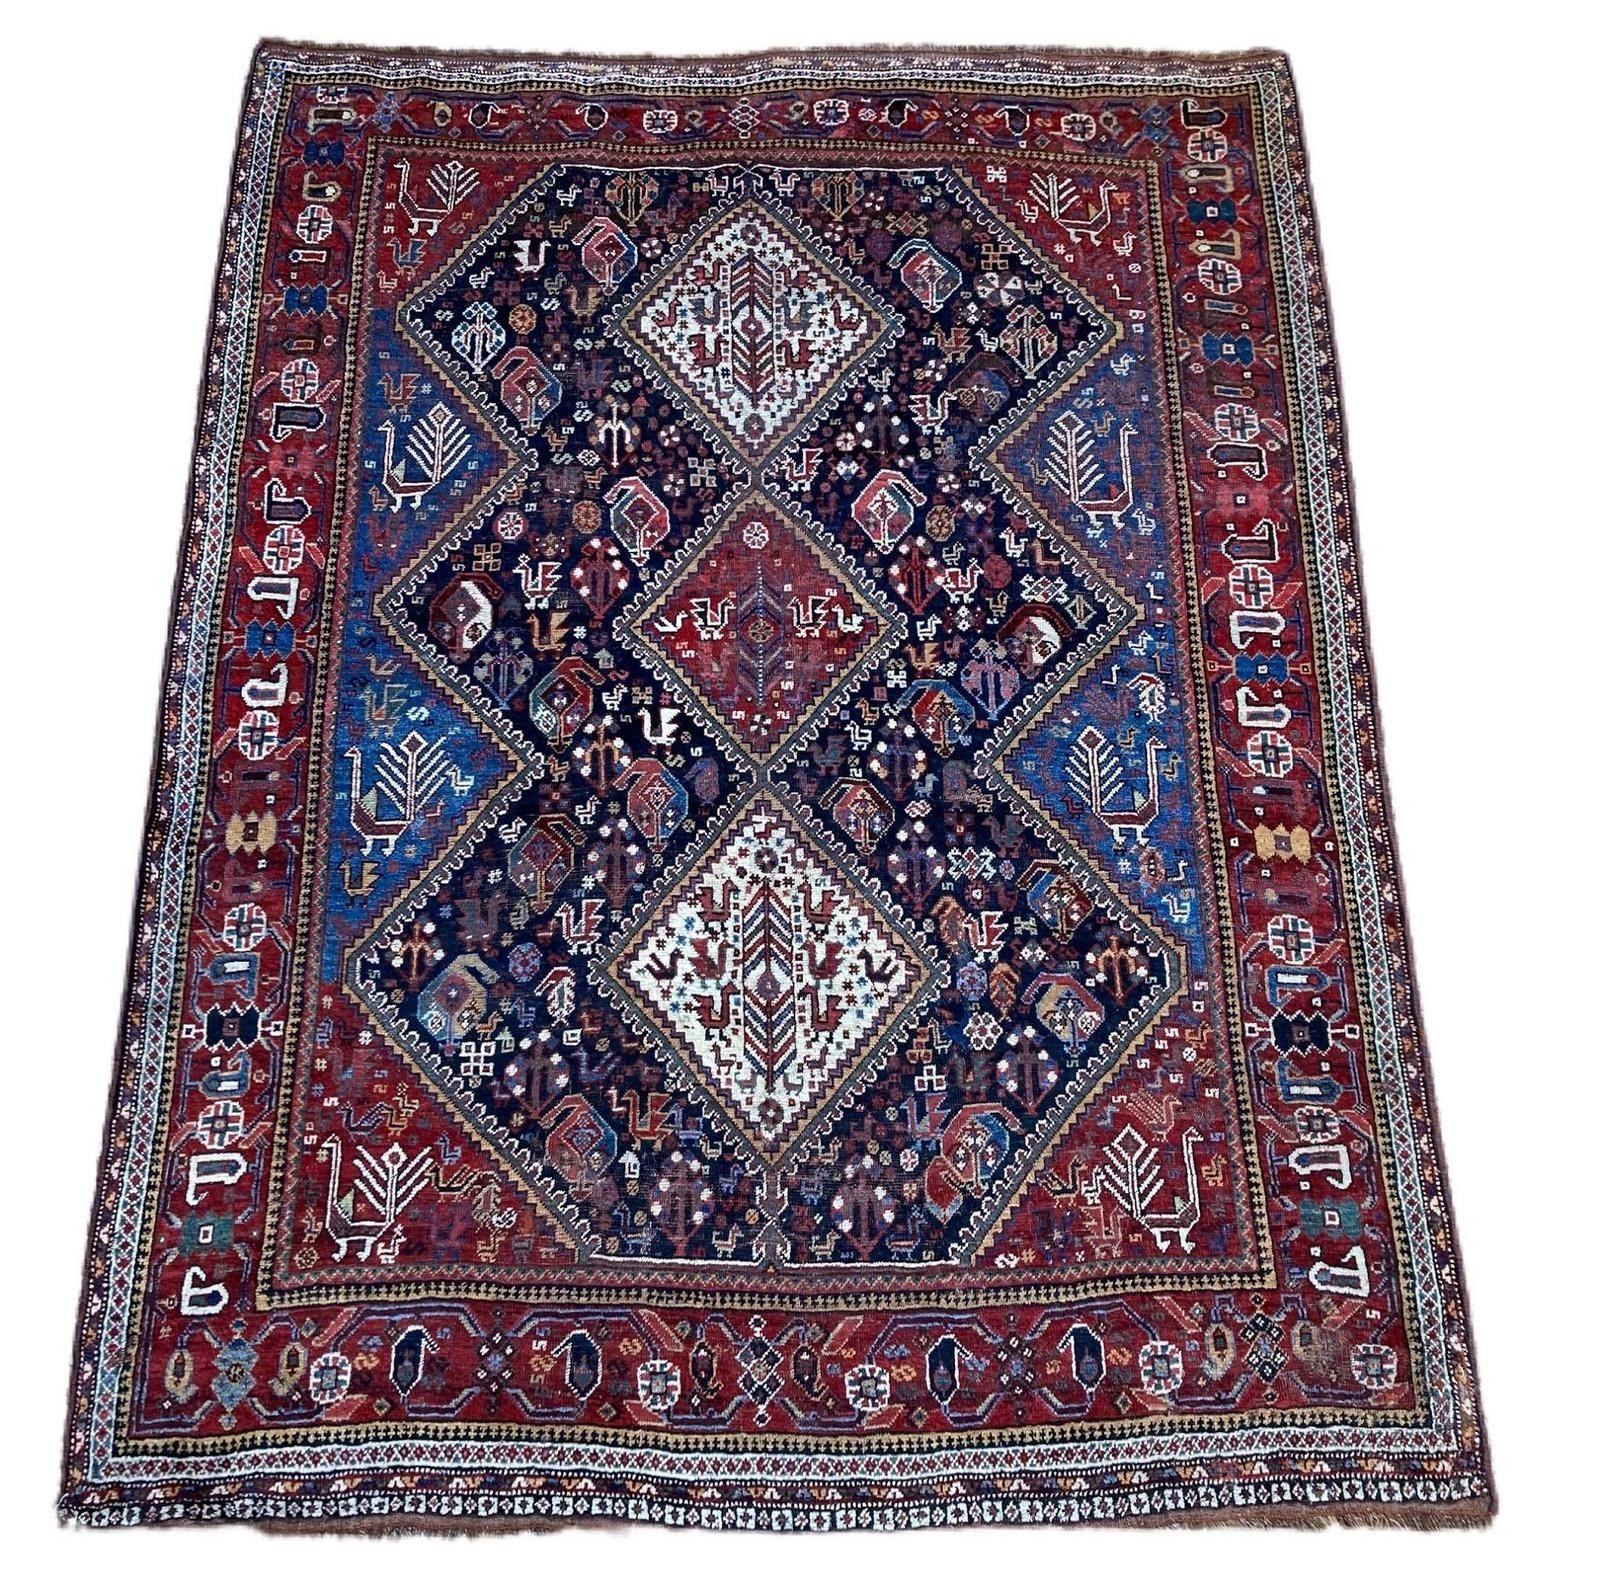 A fabulous antique Qashqai rug, handwoven by the eponymous nomadic tribe circa 1900 with a 3 medallion geometrical design on a dark indigo field and great secondary colours. A charming tribal piece with numerous birds throughout the field (see